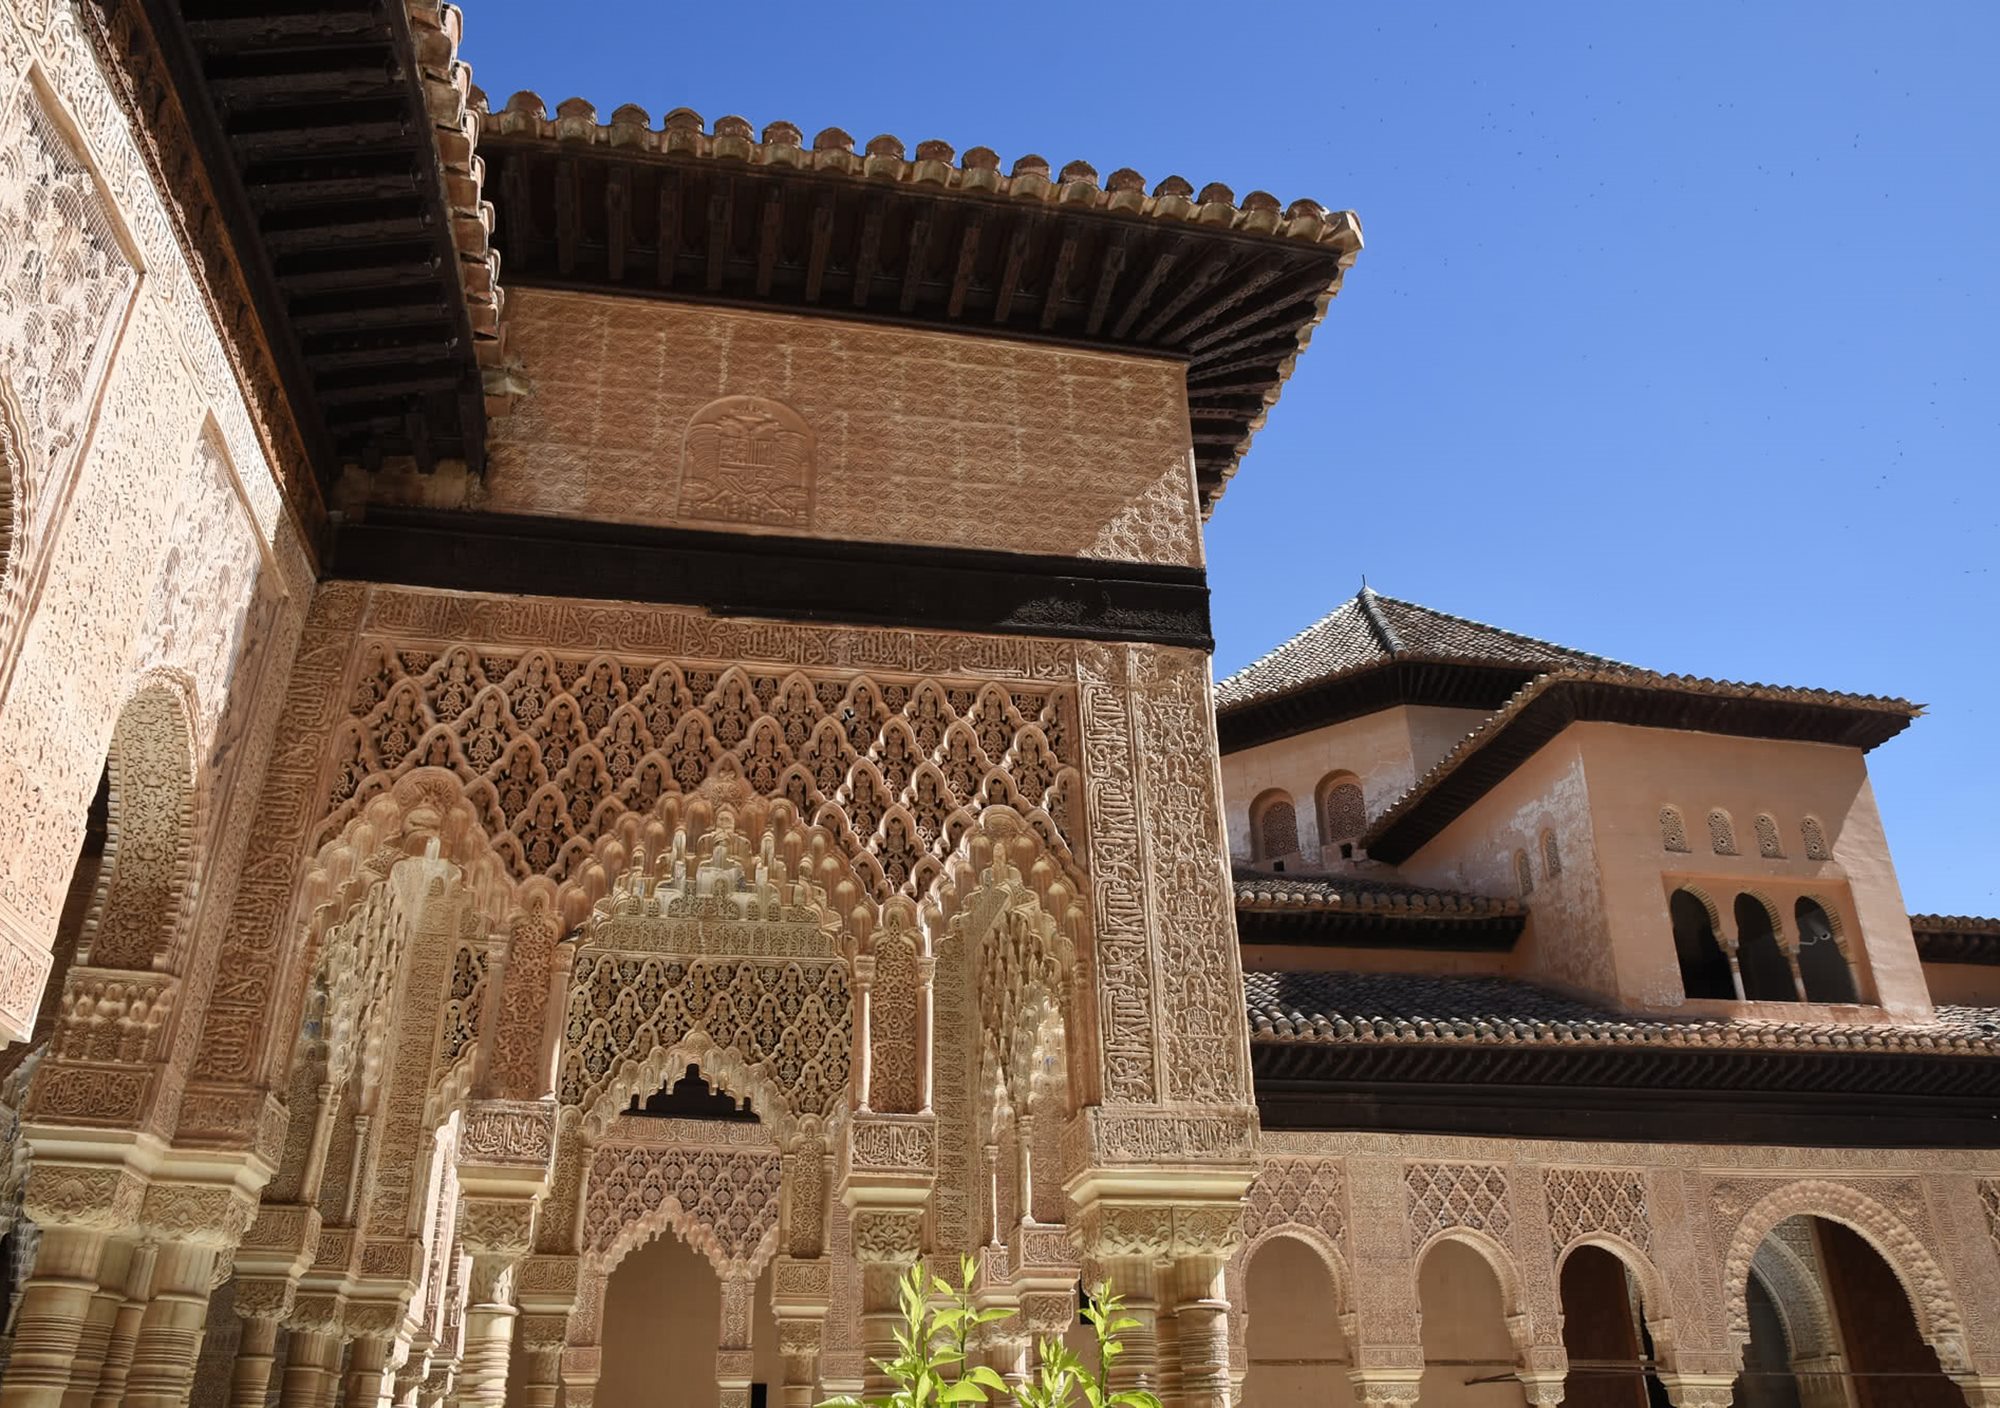 Private visit exploring the Alhambra and the Generalife